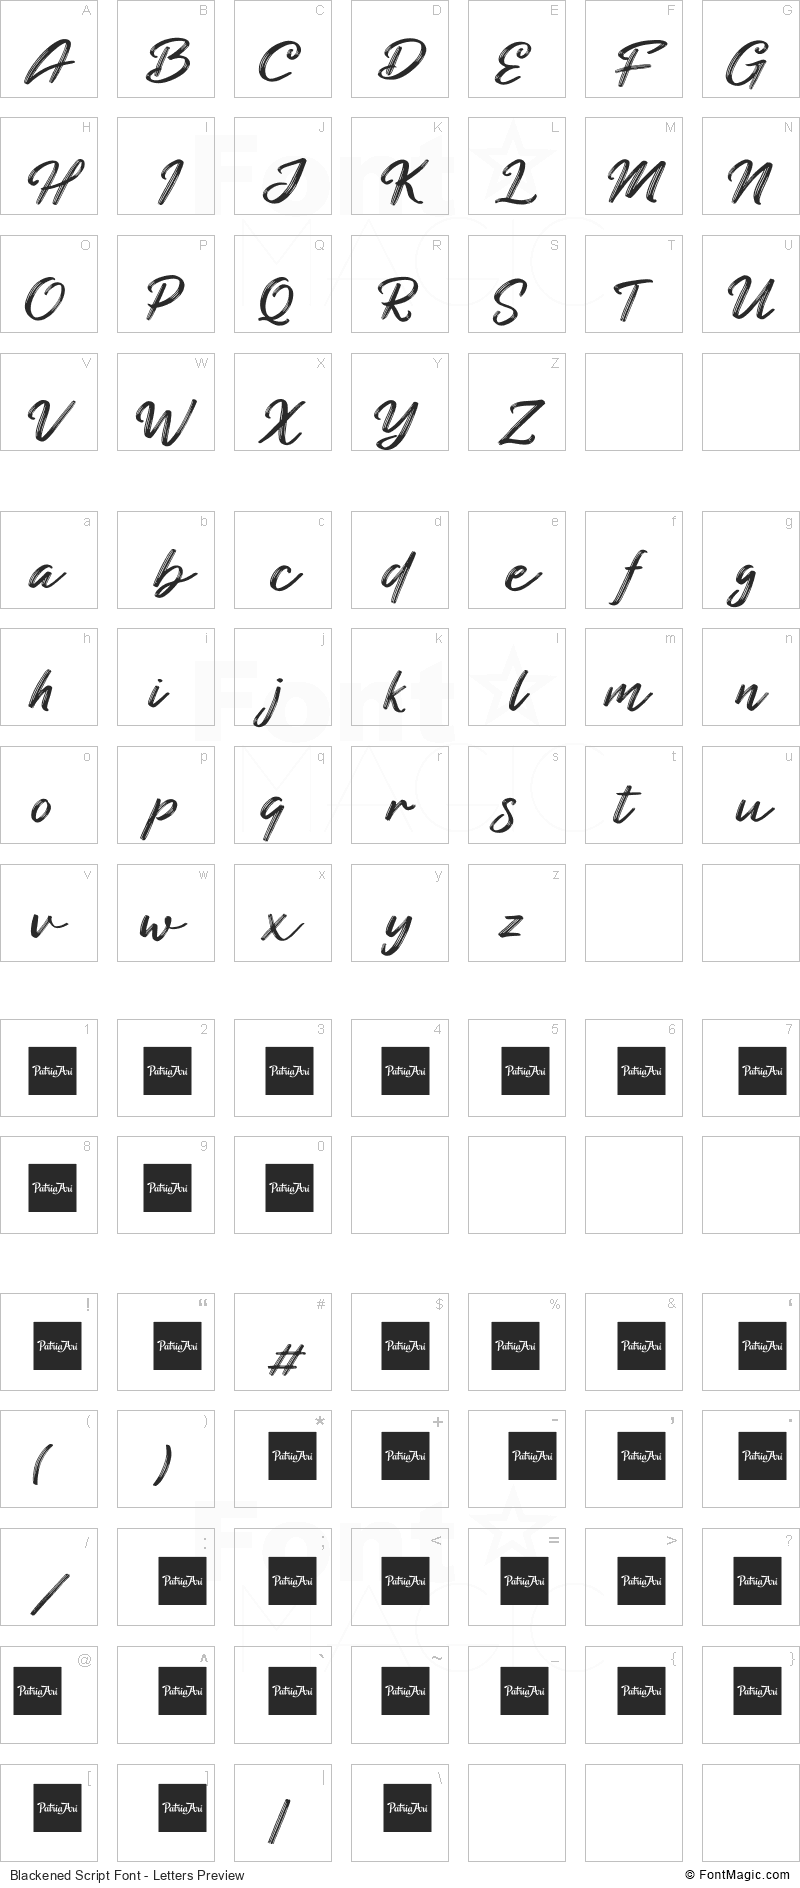 Blackened Script Font - All Latters Preview Chart